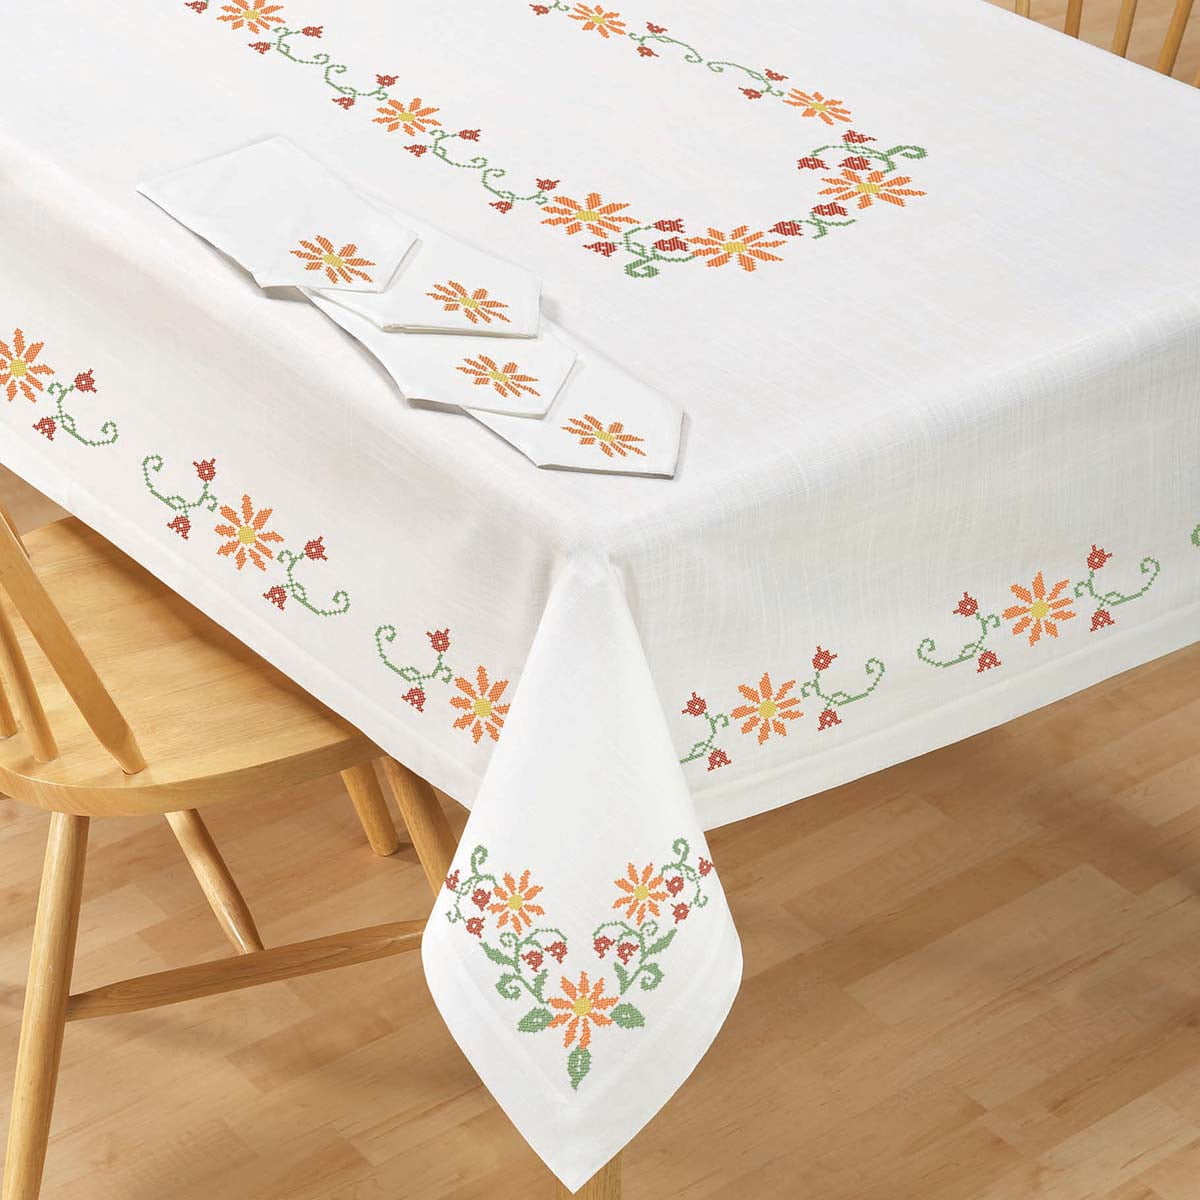 FLOWERS & HEARTS on RED by AP FLANNEL BACK VINYL TABLECLOTH 52" x 104" 